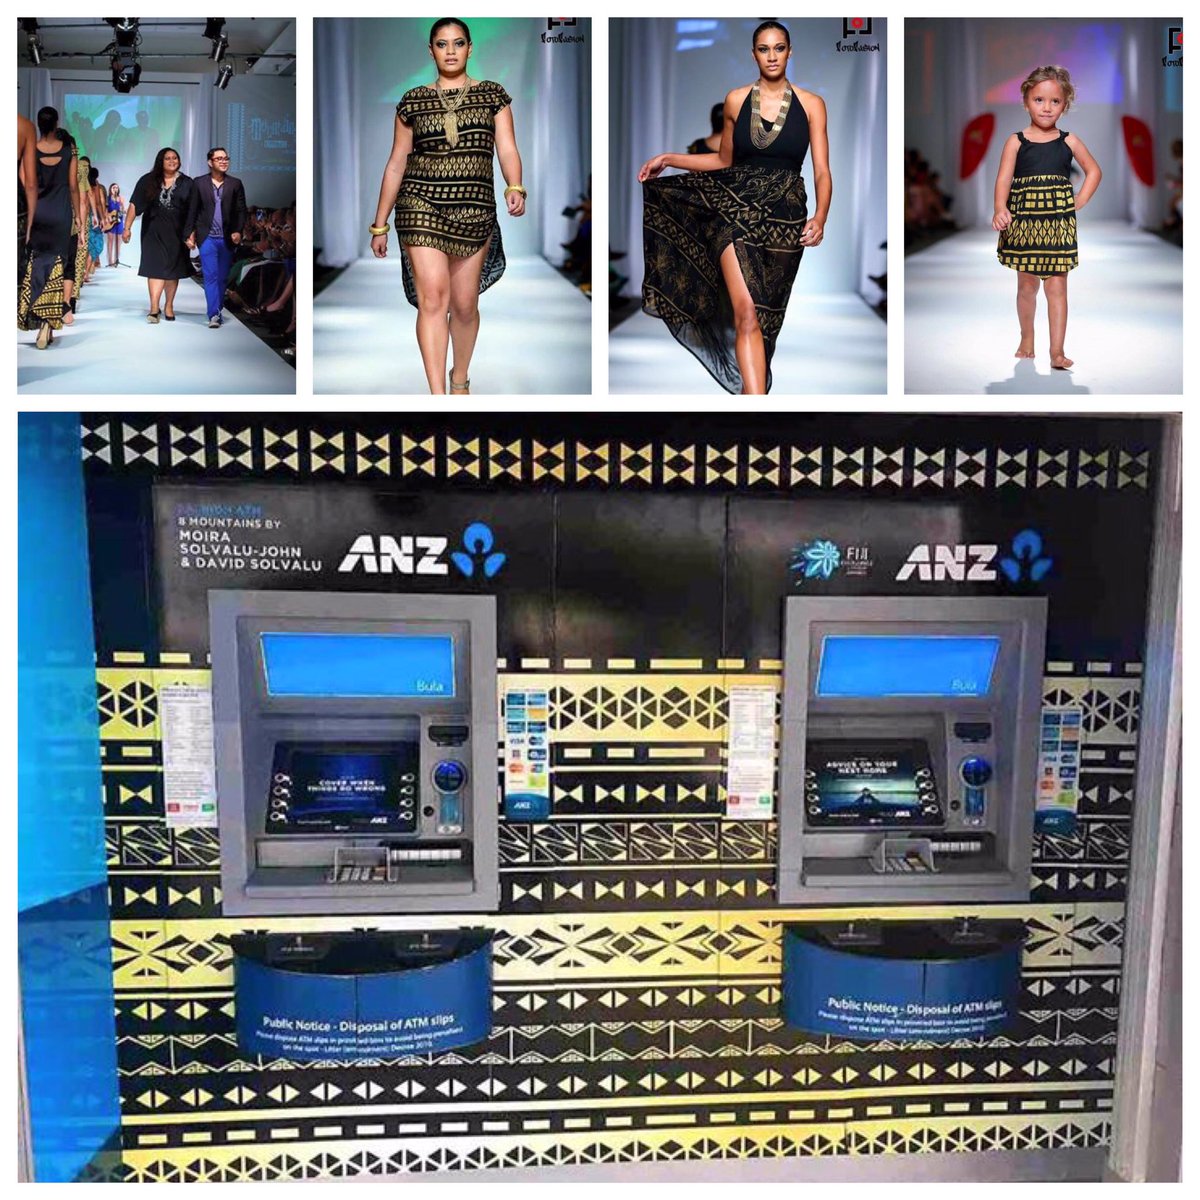 5th unveil of #ANZFashionATMs features @8Mountains ! Great work from Moira Solvalu John and David Solvalu! #ANZFETA #ANZFiji